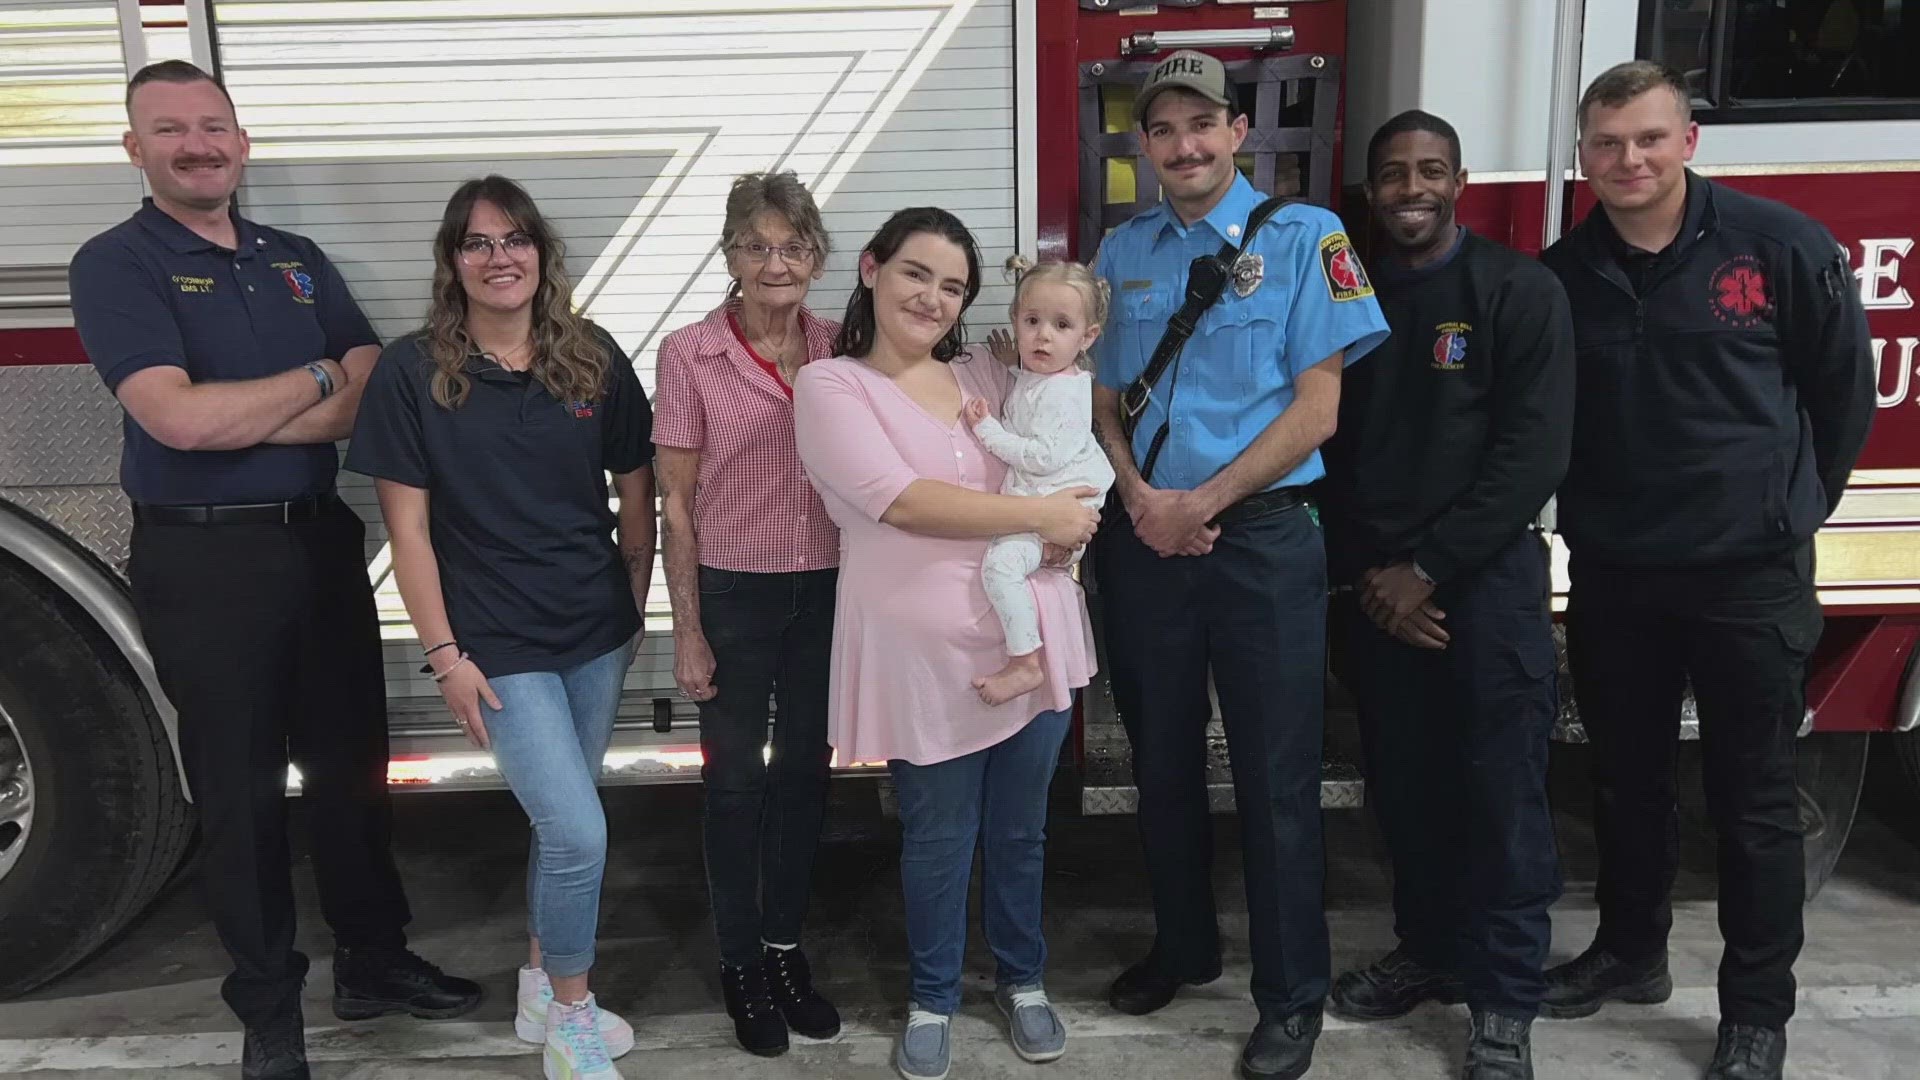 Dovie Smith went into labor with twins unexpectedly at home. First responders came to aid in delivery and life-saving measures of the first baby girl.